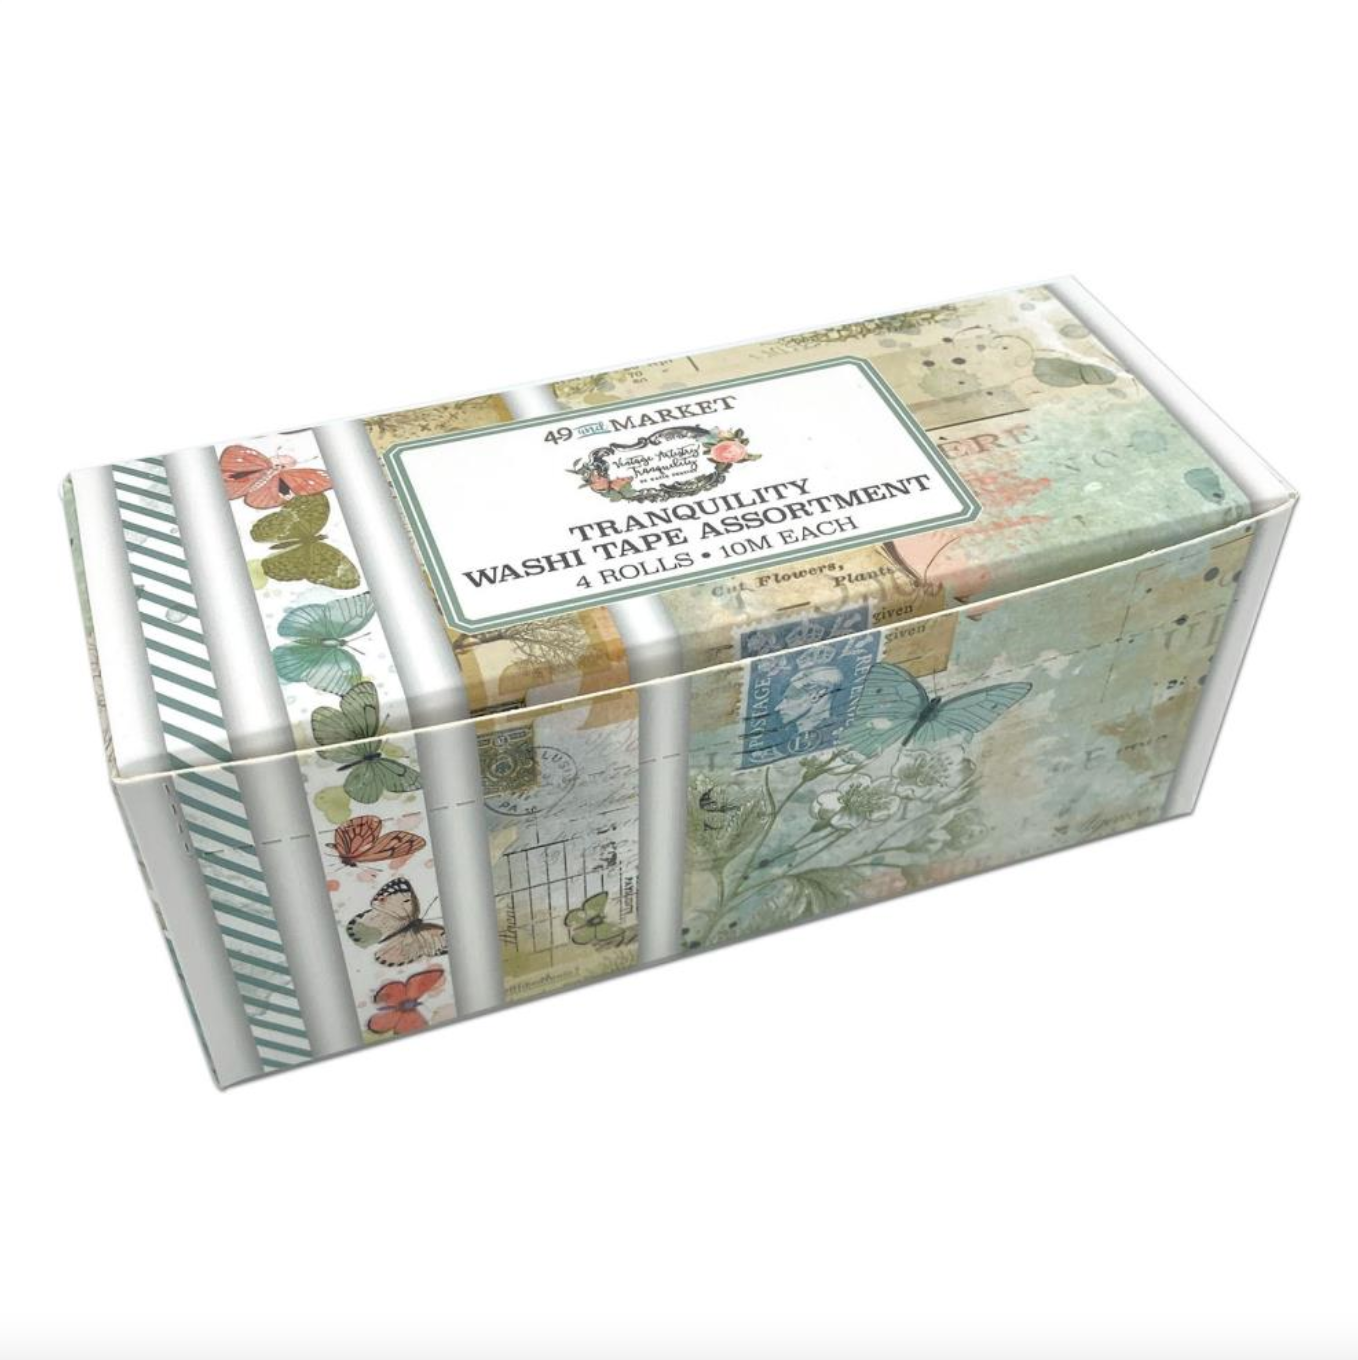 4 Rolls Washi Tape - Tranquility - Vintage Artistry - 49 And Market